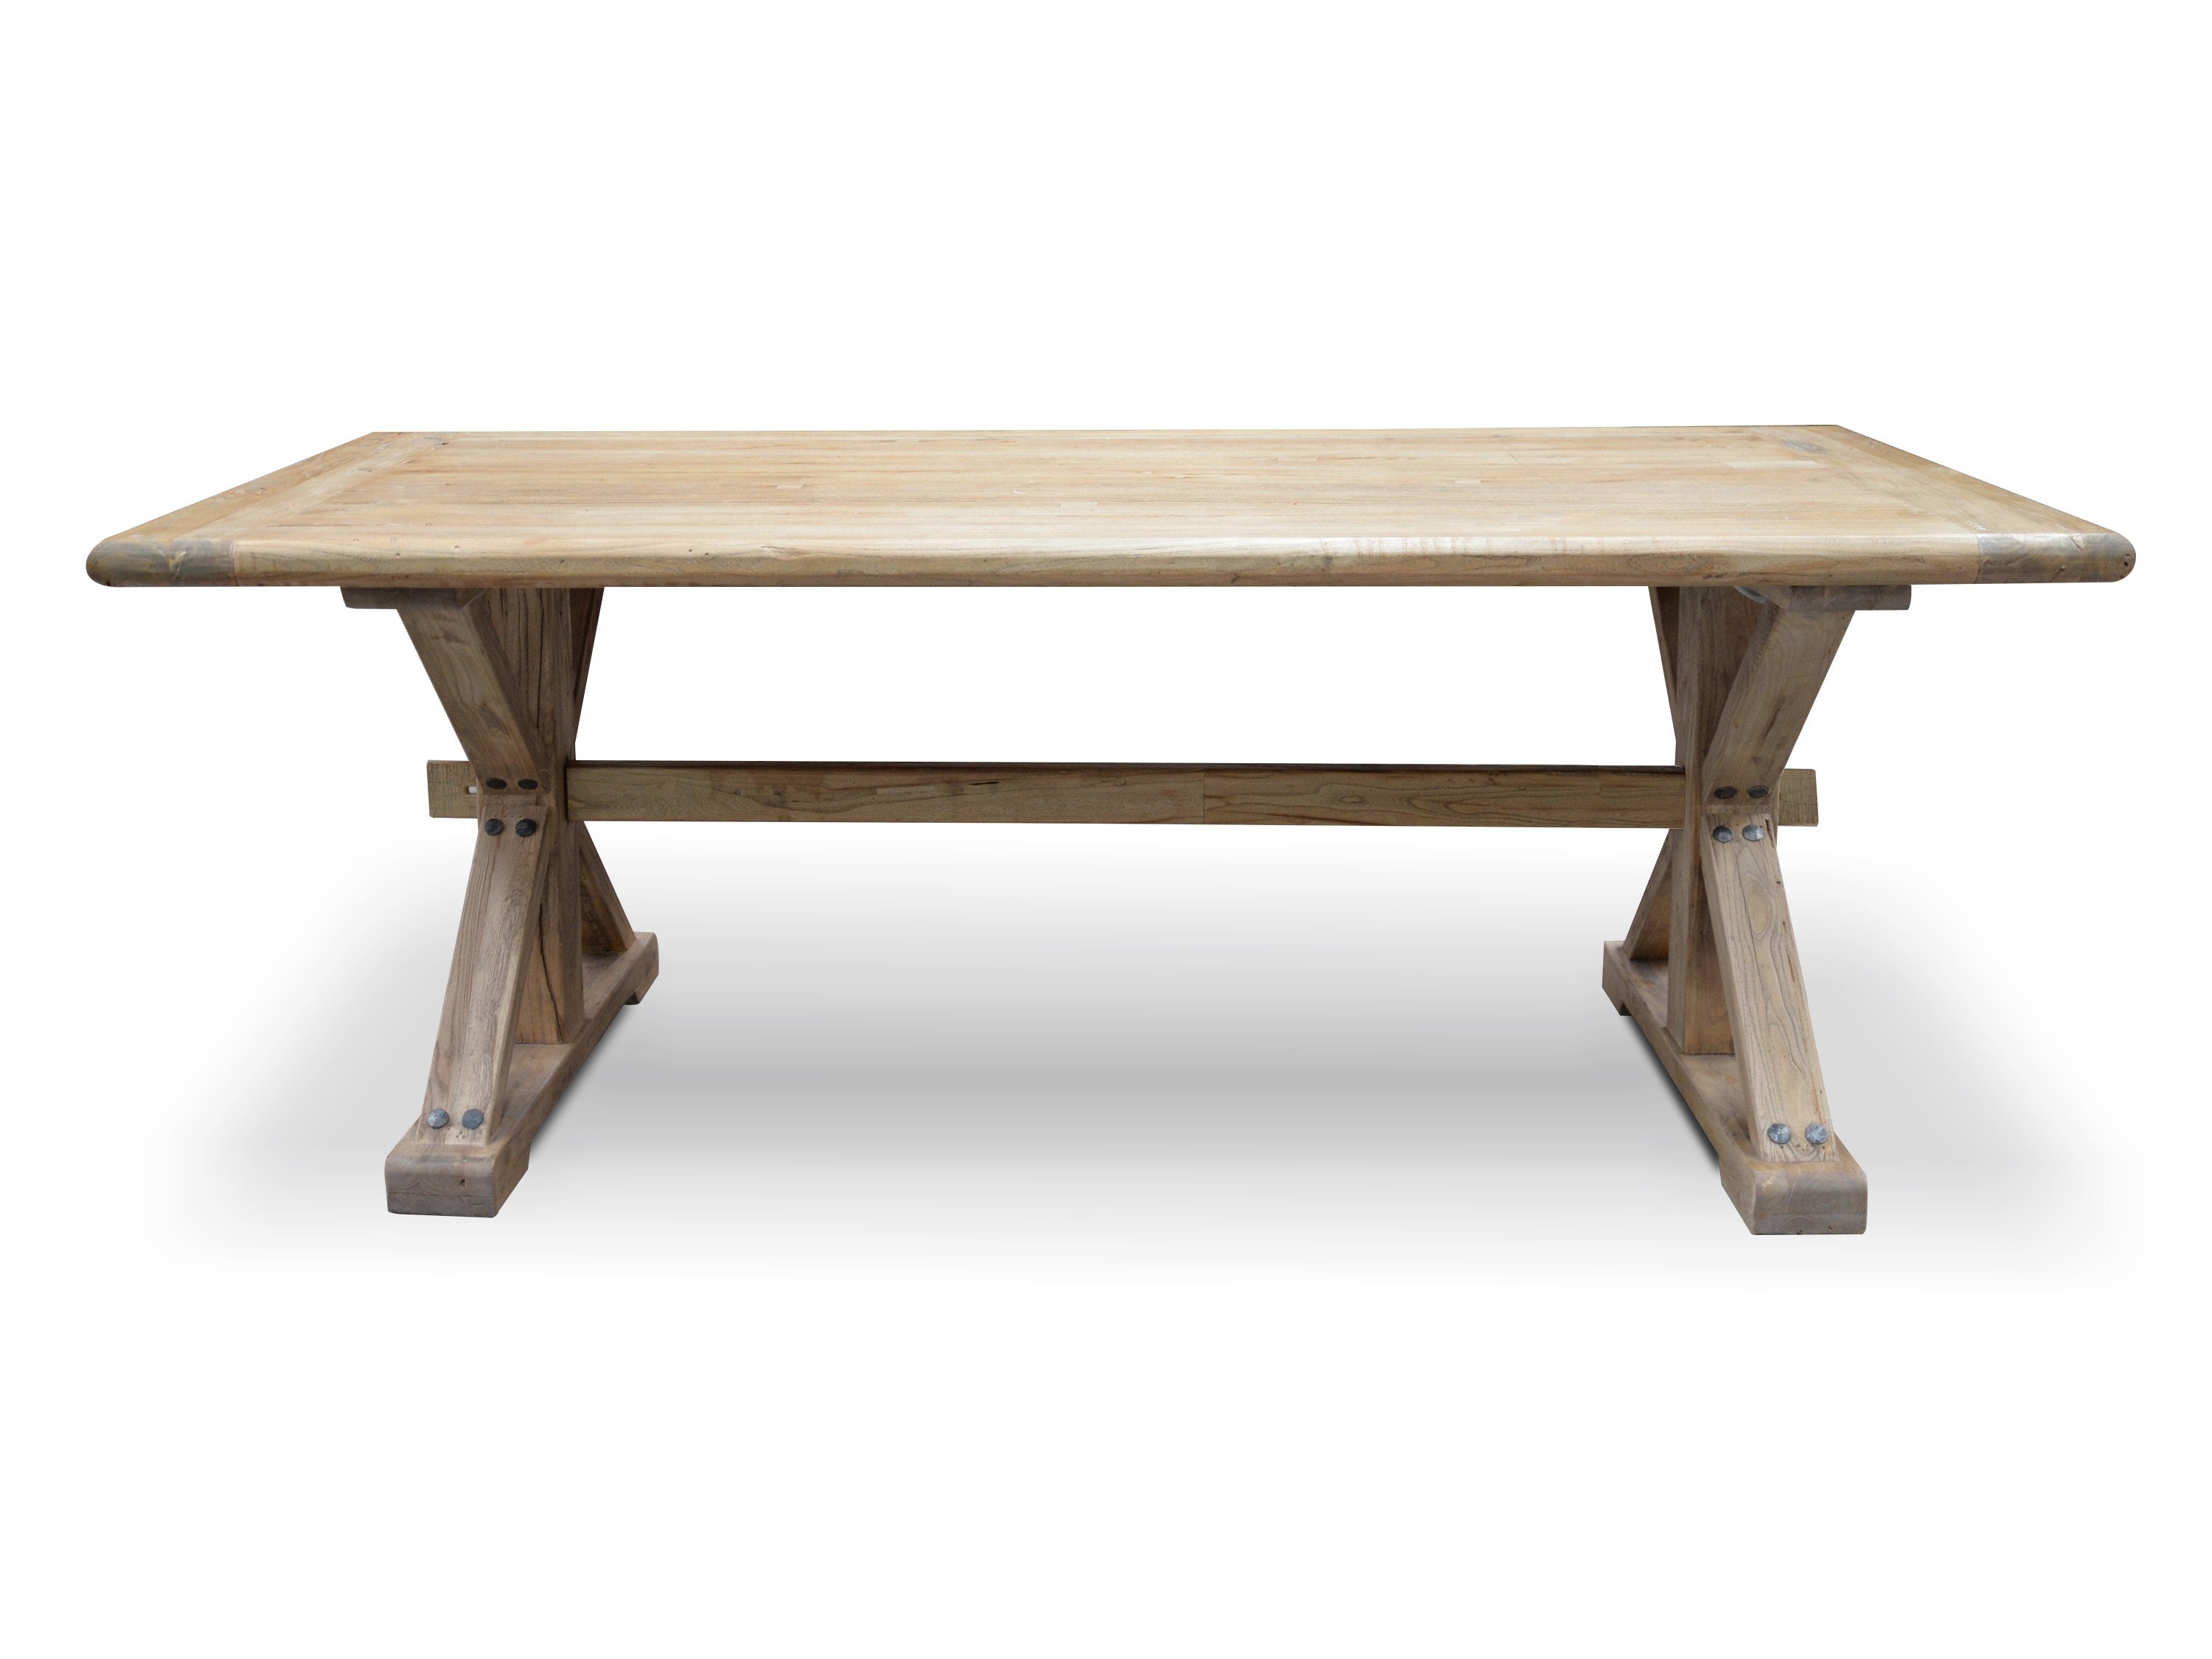 Parliment 2m Reclaimed Oak Wood Dining Table - Rustic Natural - Dining Tables